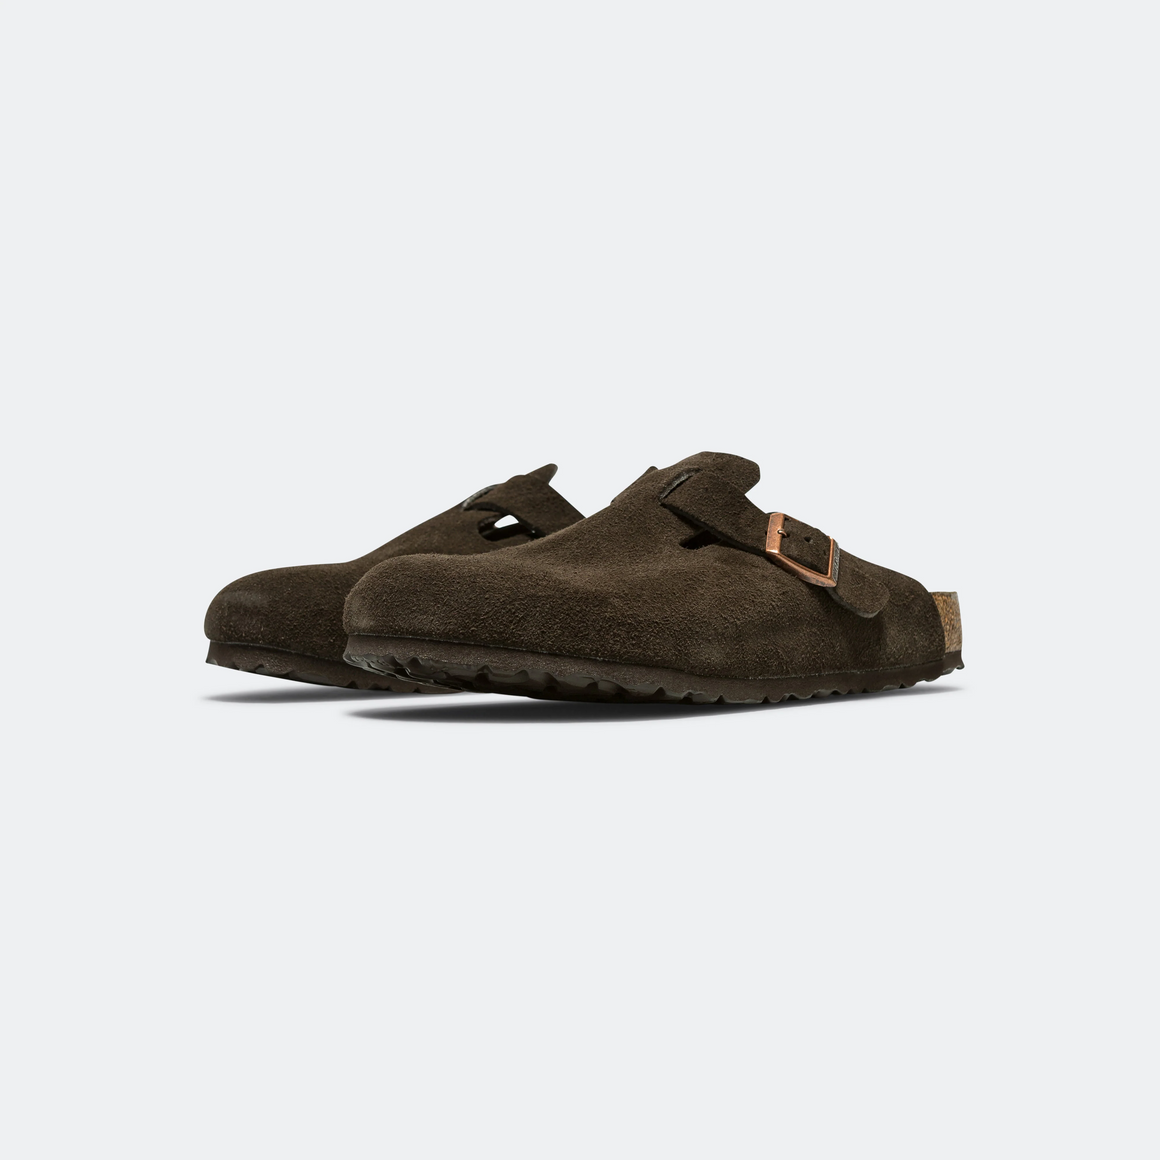 Birkenstock - Boston SFB - Mocca Suede Leather - UP THERE